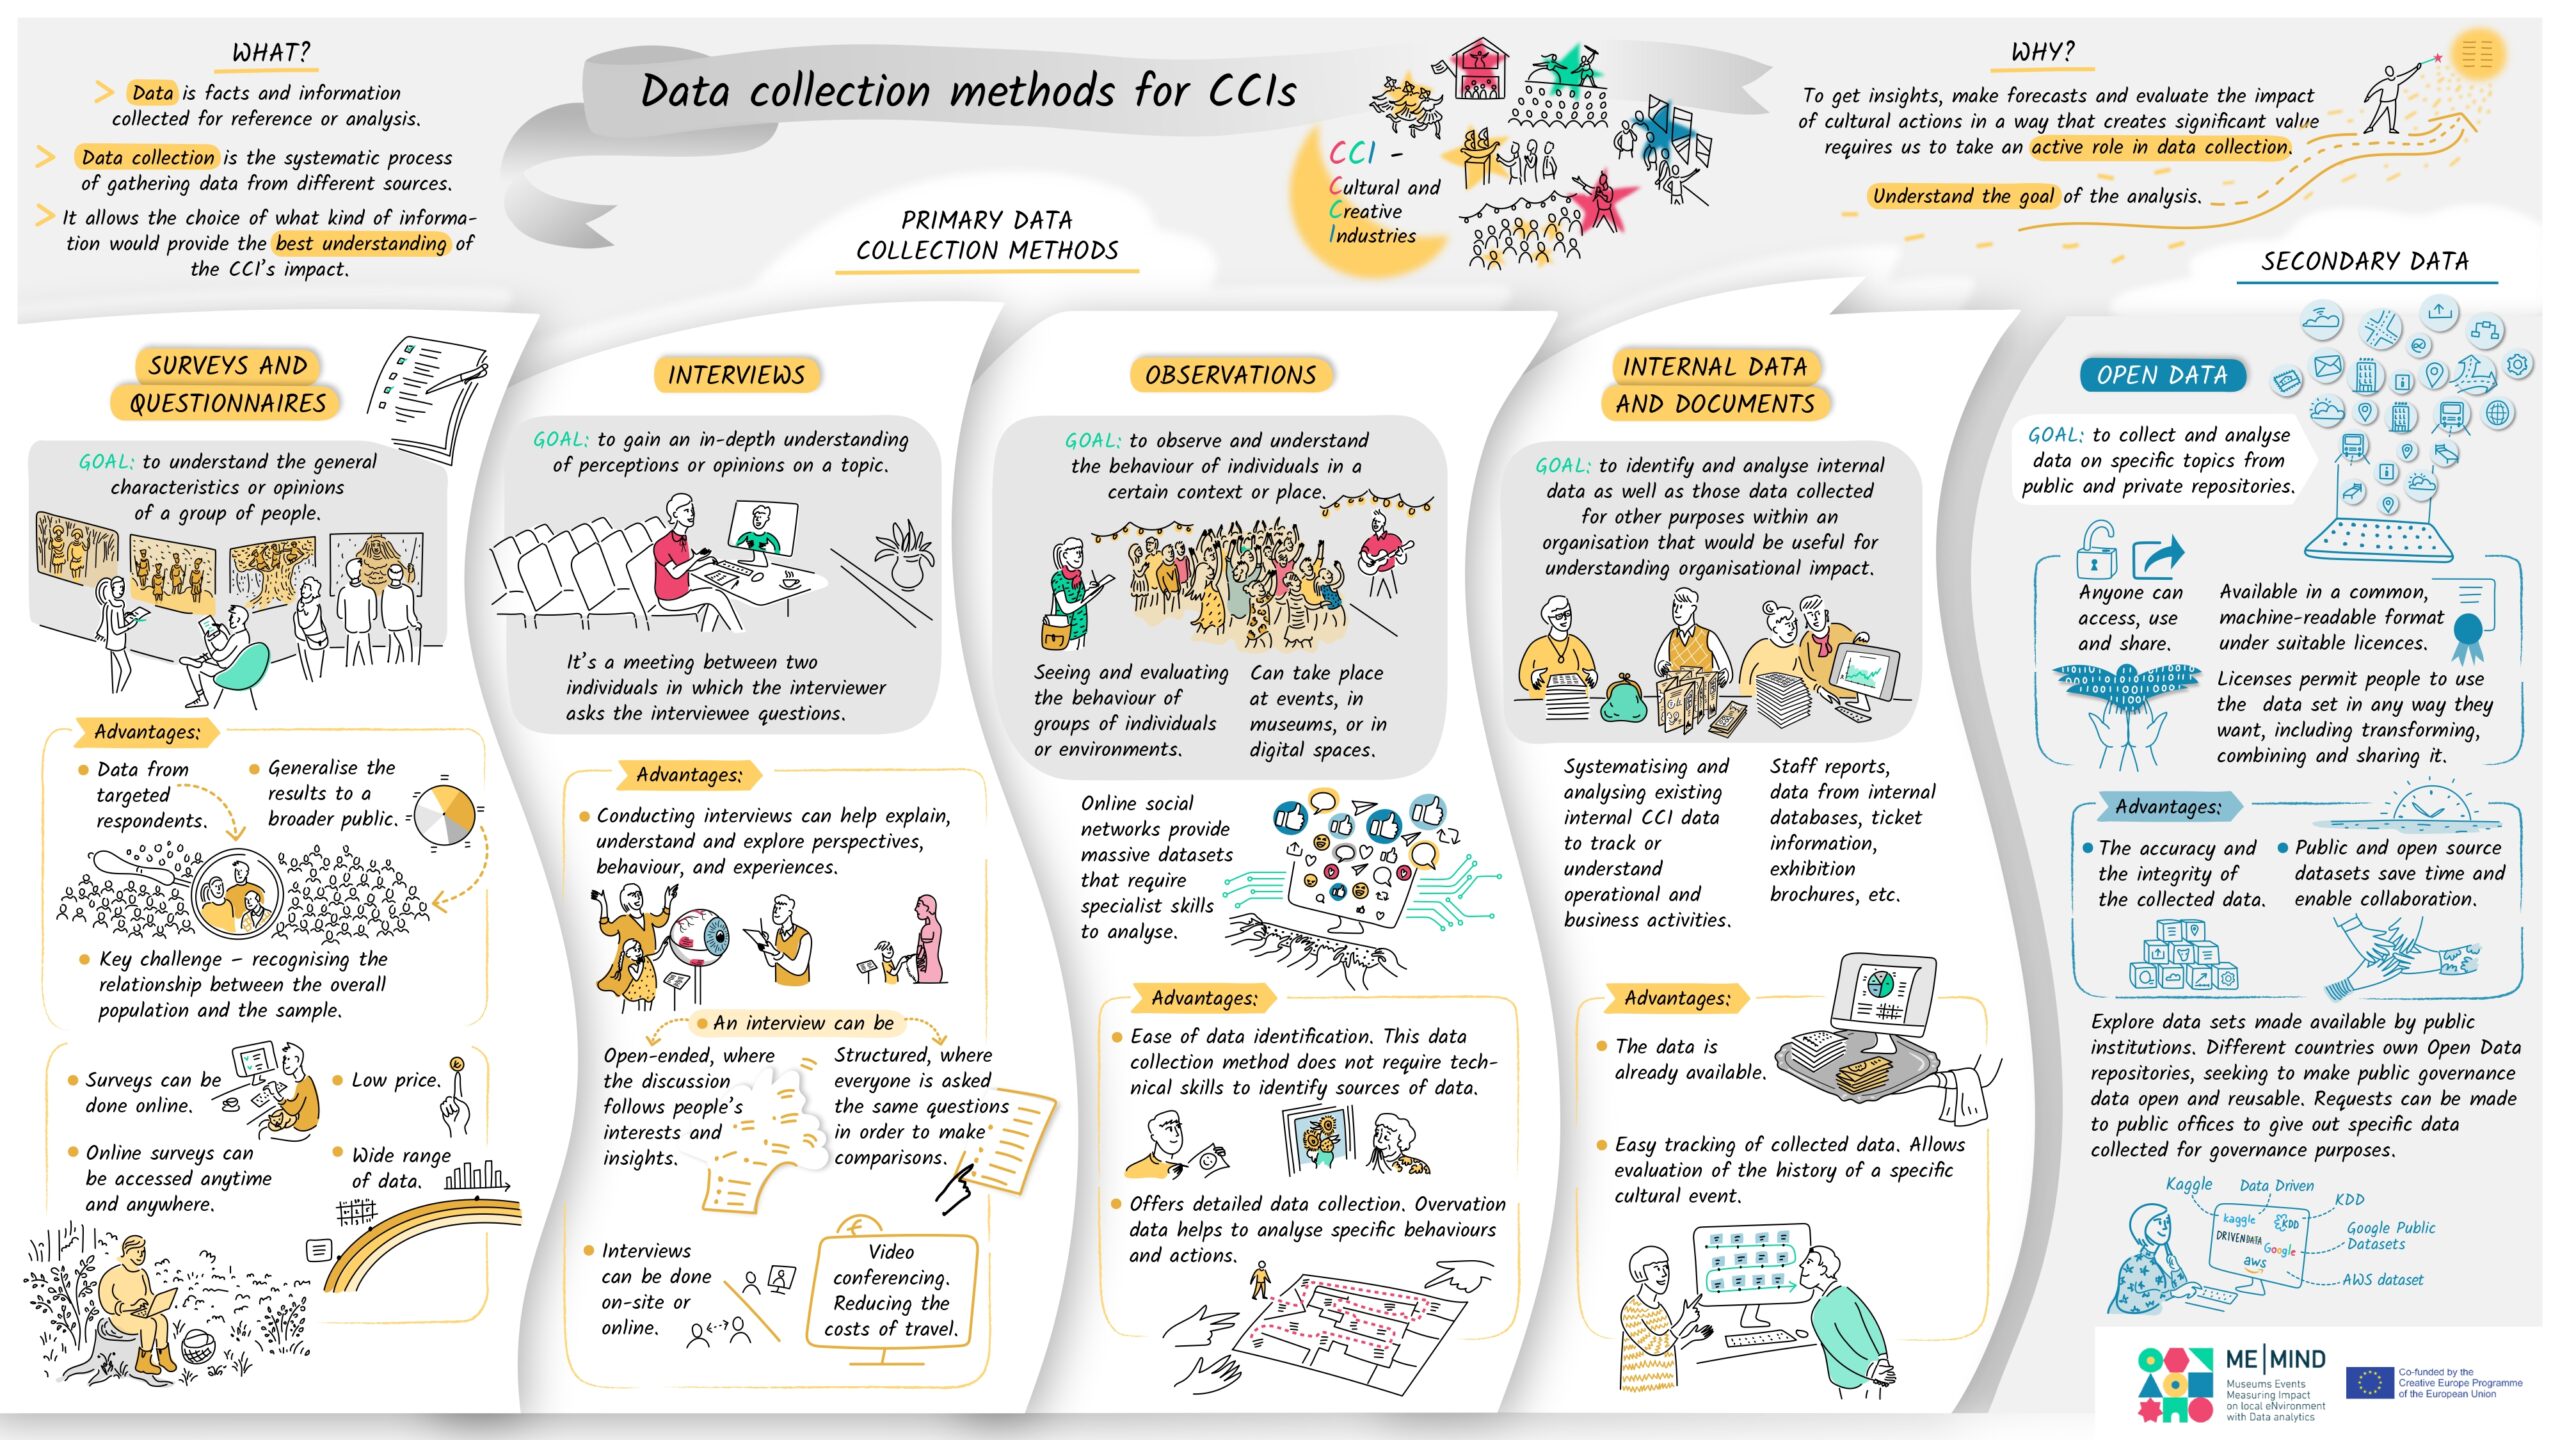 Me-Mind 2nd infographic: Data collection methods